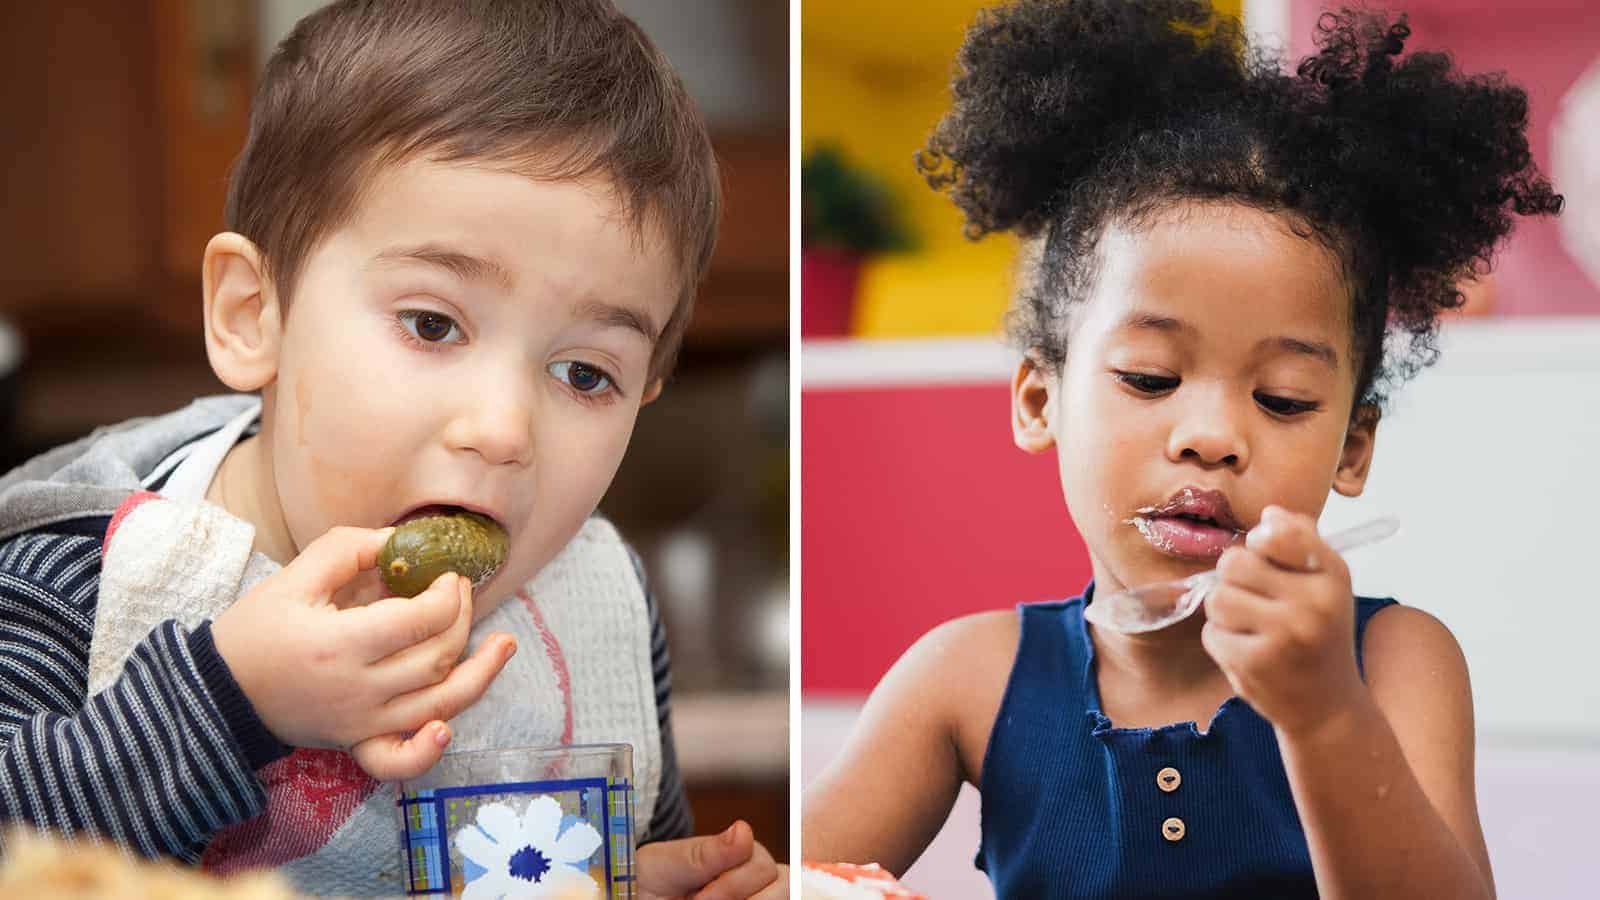 20 Healthiest Snacks for Kids, According to Nutritionists